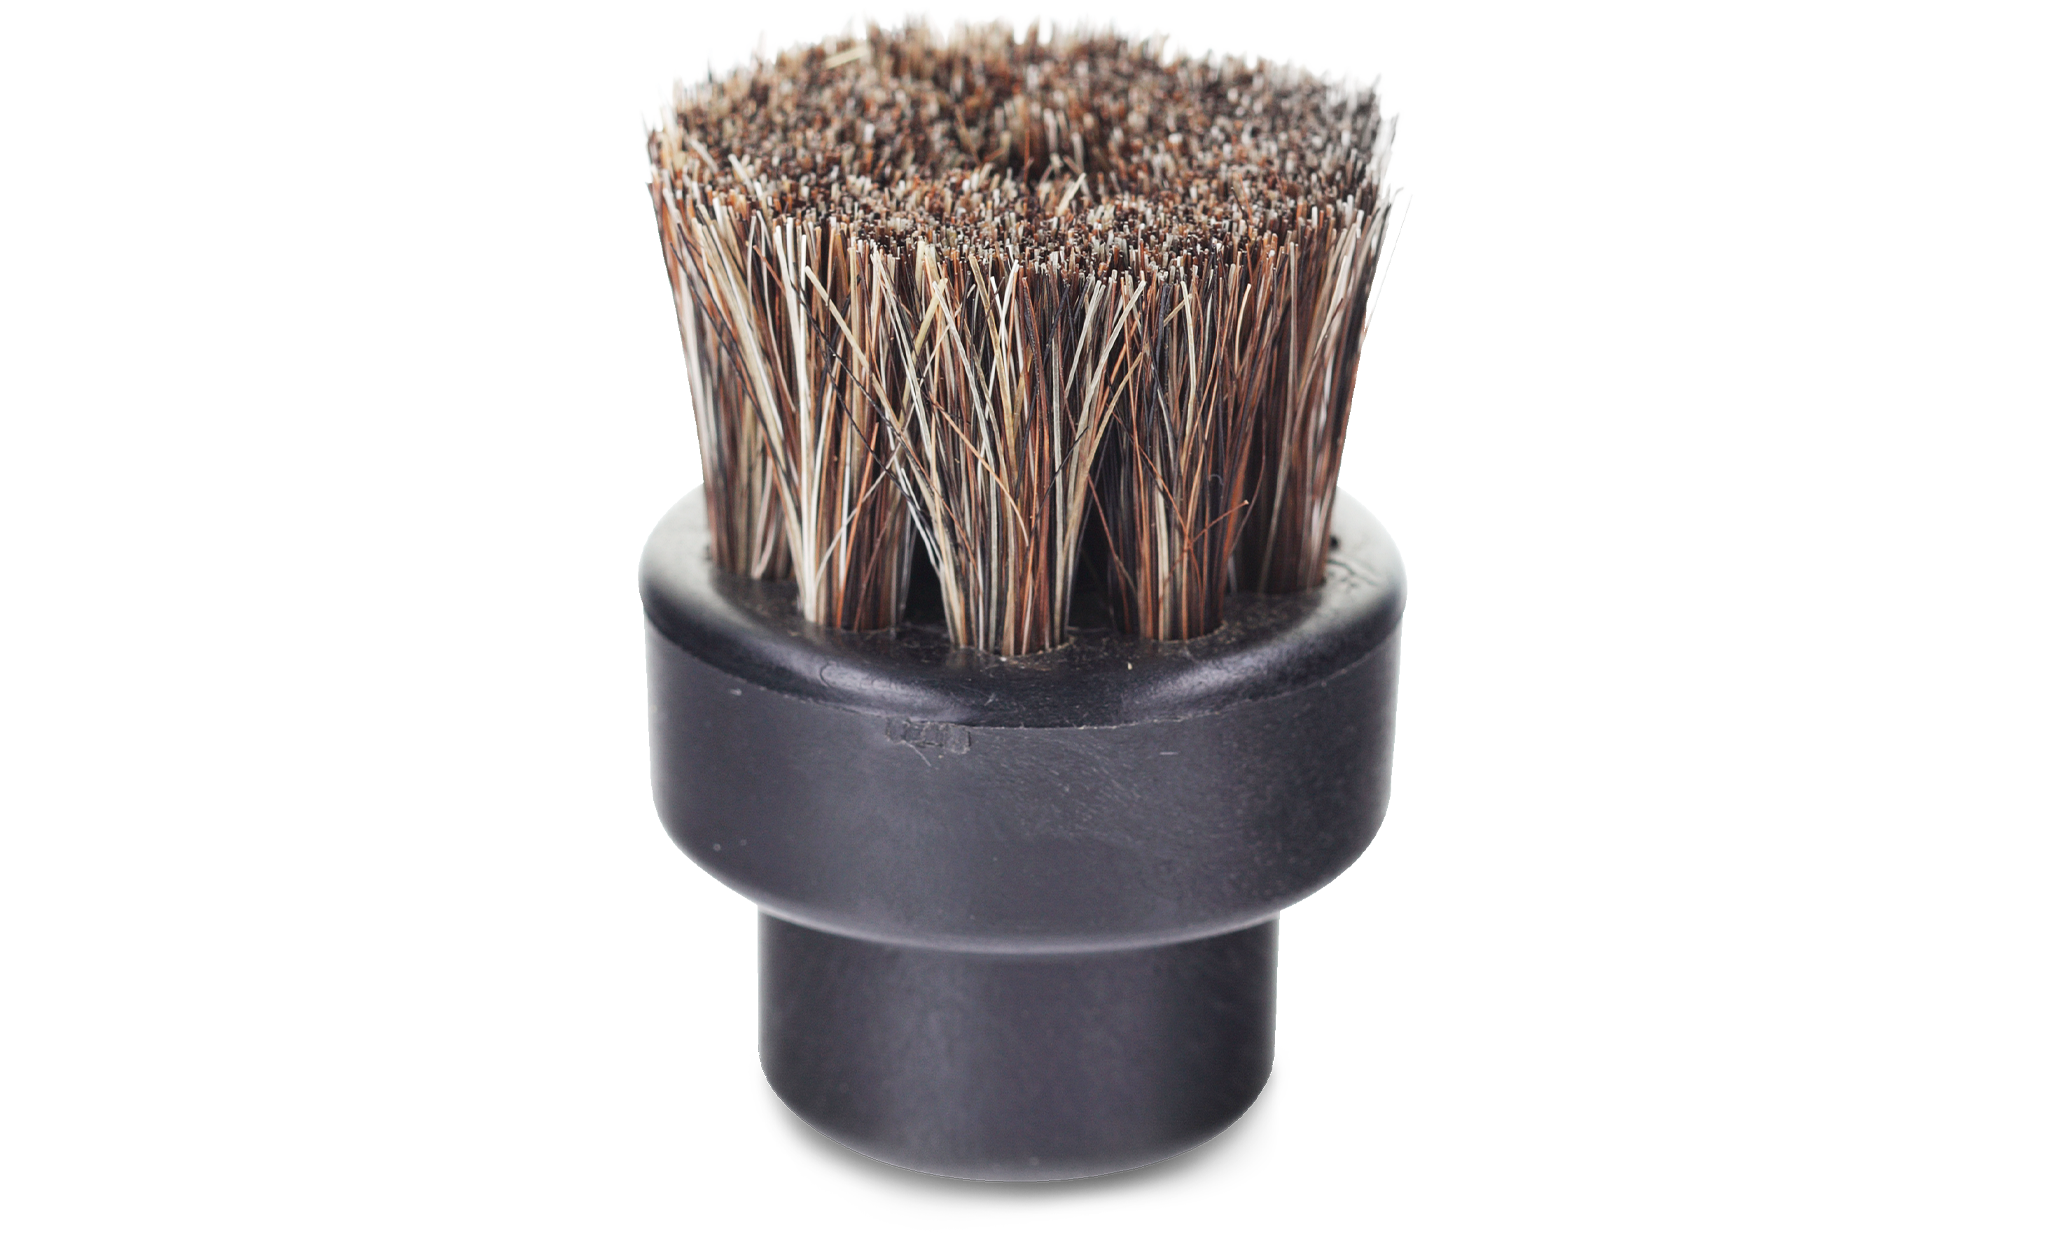 A pack of 10 horsehair brushes for your Dupray steam cleaner. 